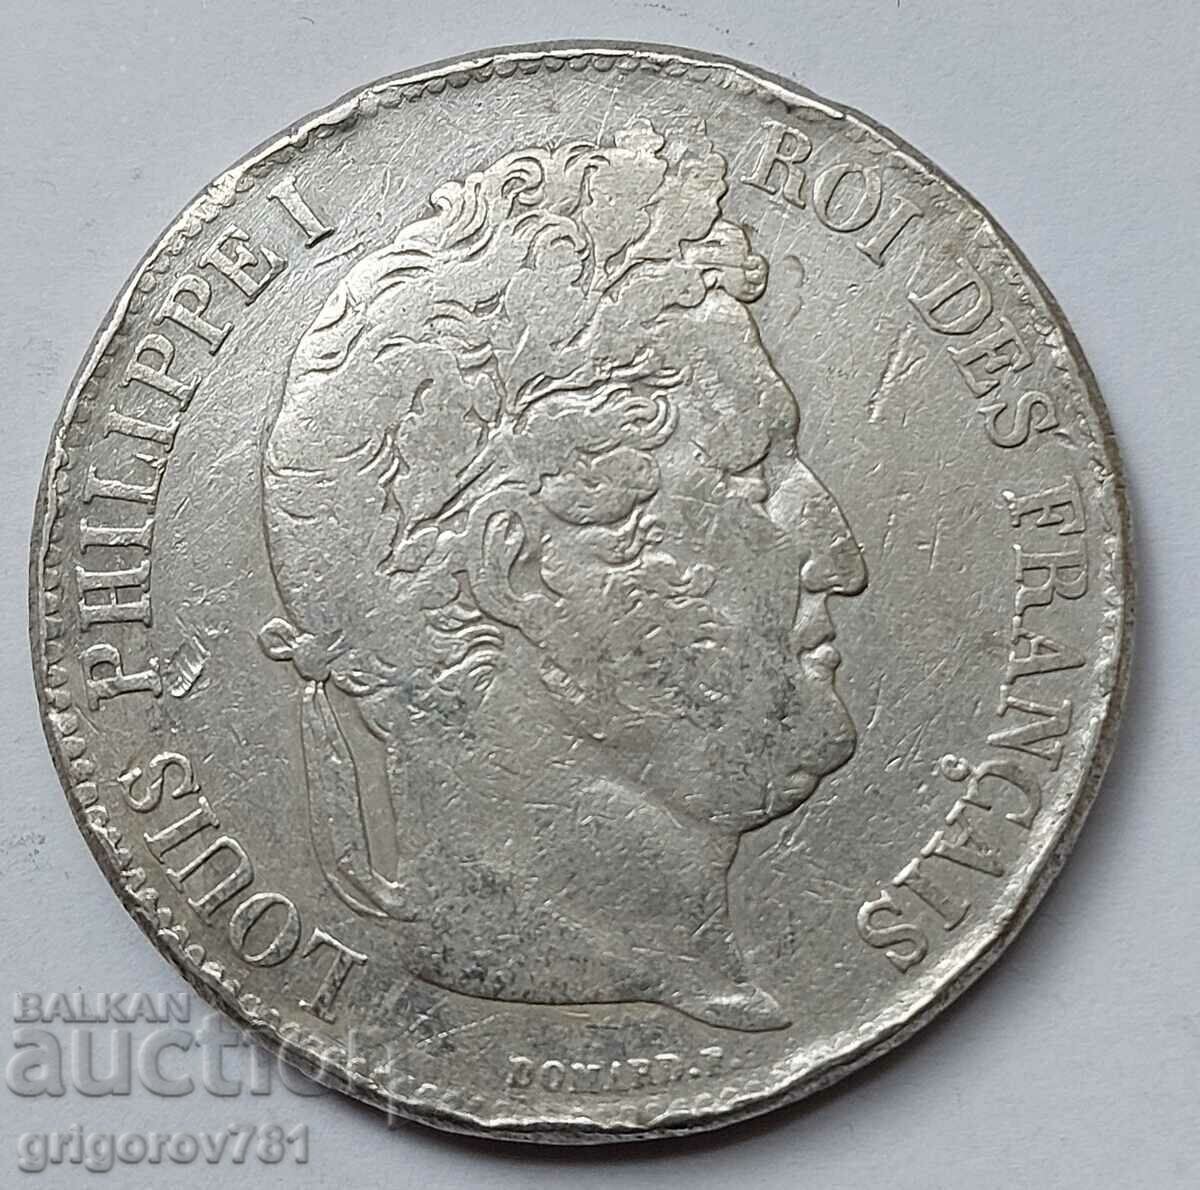 5 Francs Silver France 1835 W- Silver Coin #126